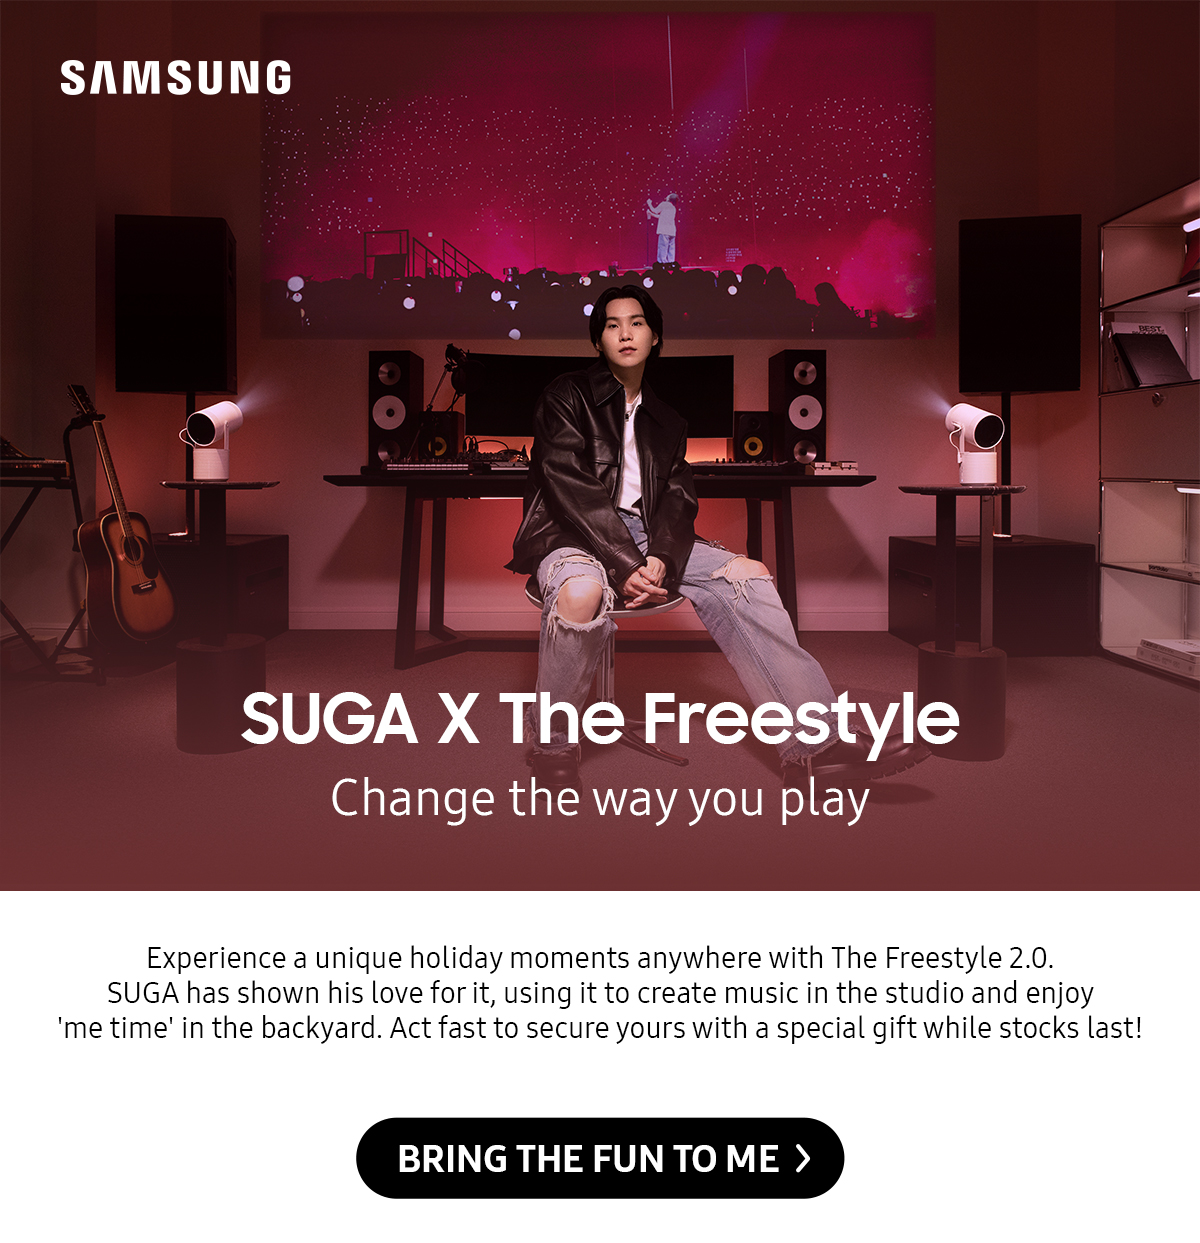 SUGA x The Freestyle | Experience a unique holiday moments anywhere with The Freestyle 2.0. SUGA has shown his love for it, using it to create music in the studio and enjoy 'me time' in the backyard. Act fast to secure yours with a special gift while stocks last! Click here to get yours!